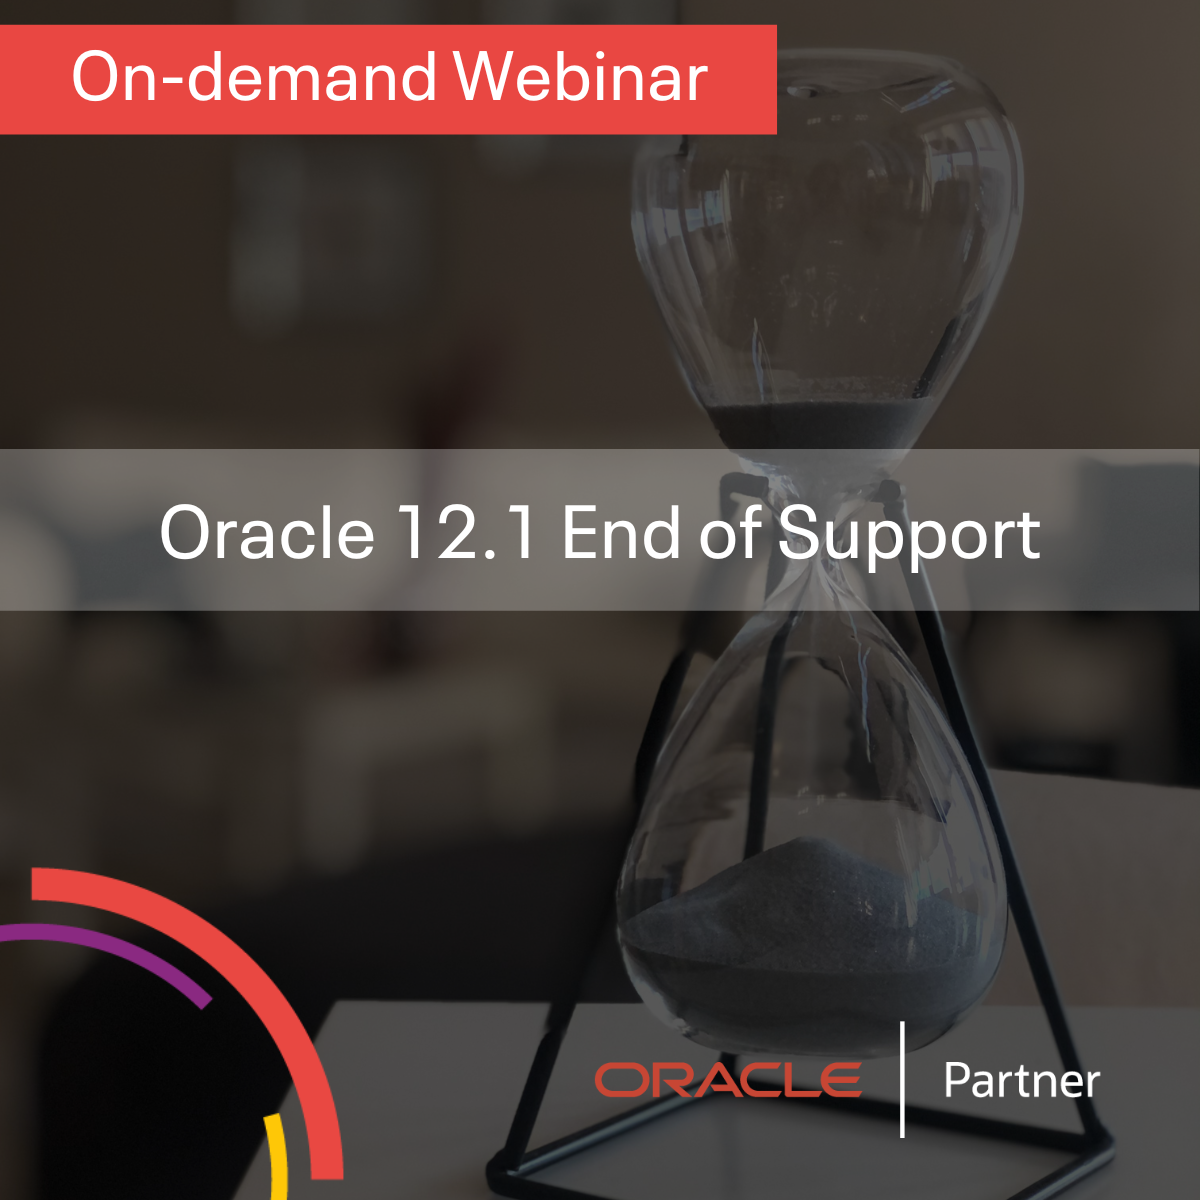 Oracle 12.1 End of Support